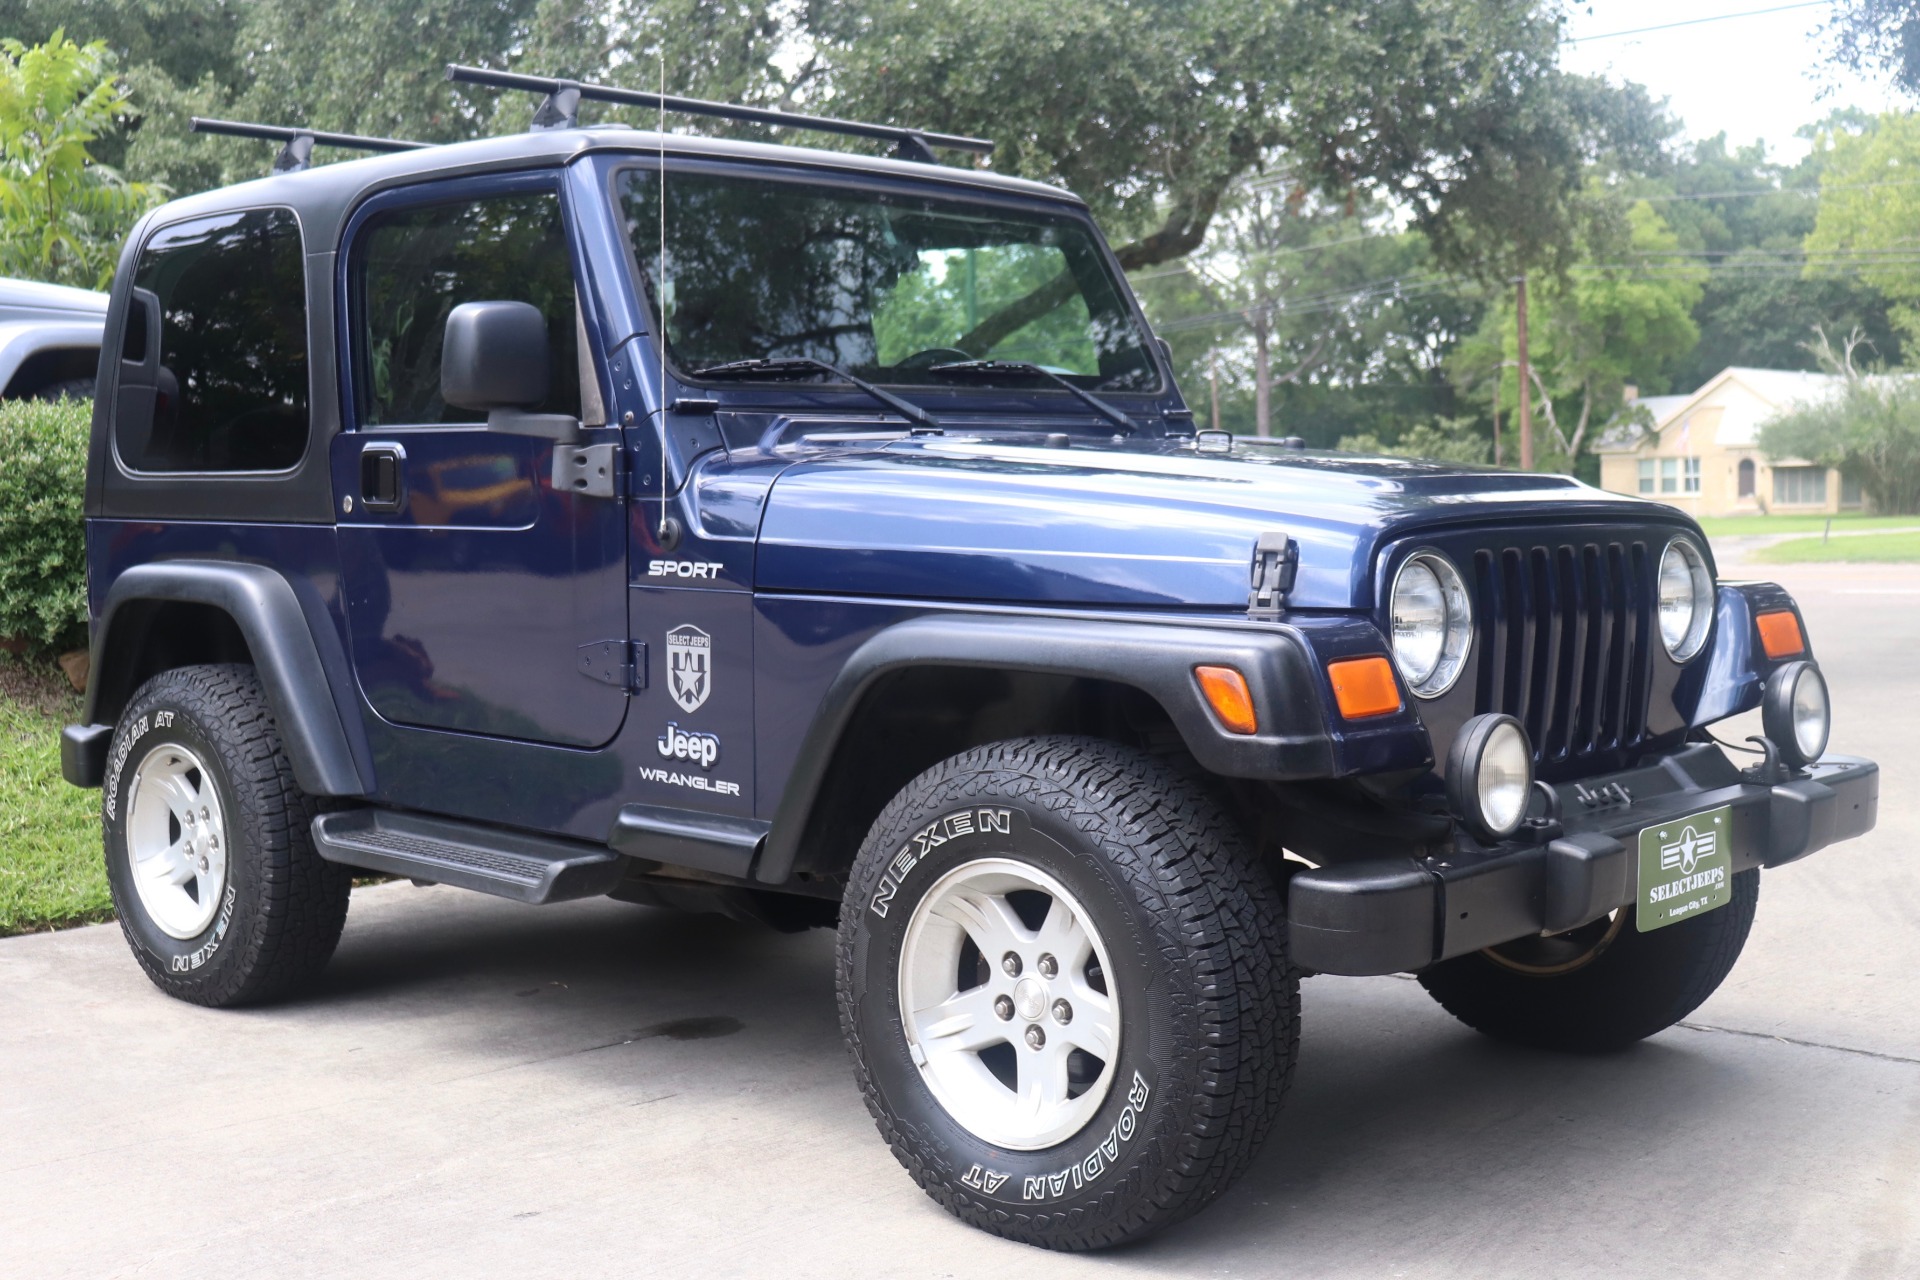 Used 2006 Jeep Wrangler Sport For Sale ($13,995) | Select Jeeps Inc. Stock  #707618